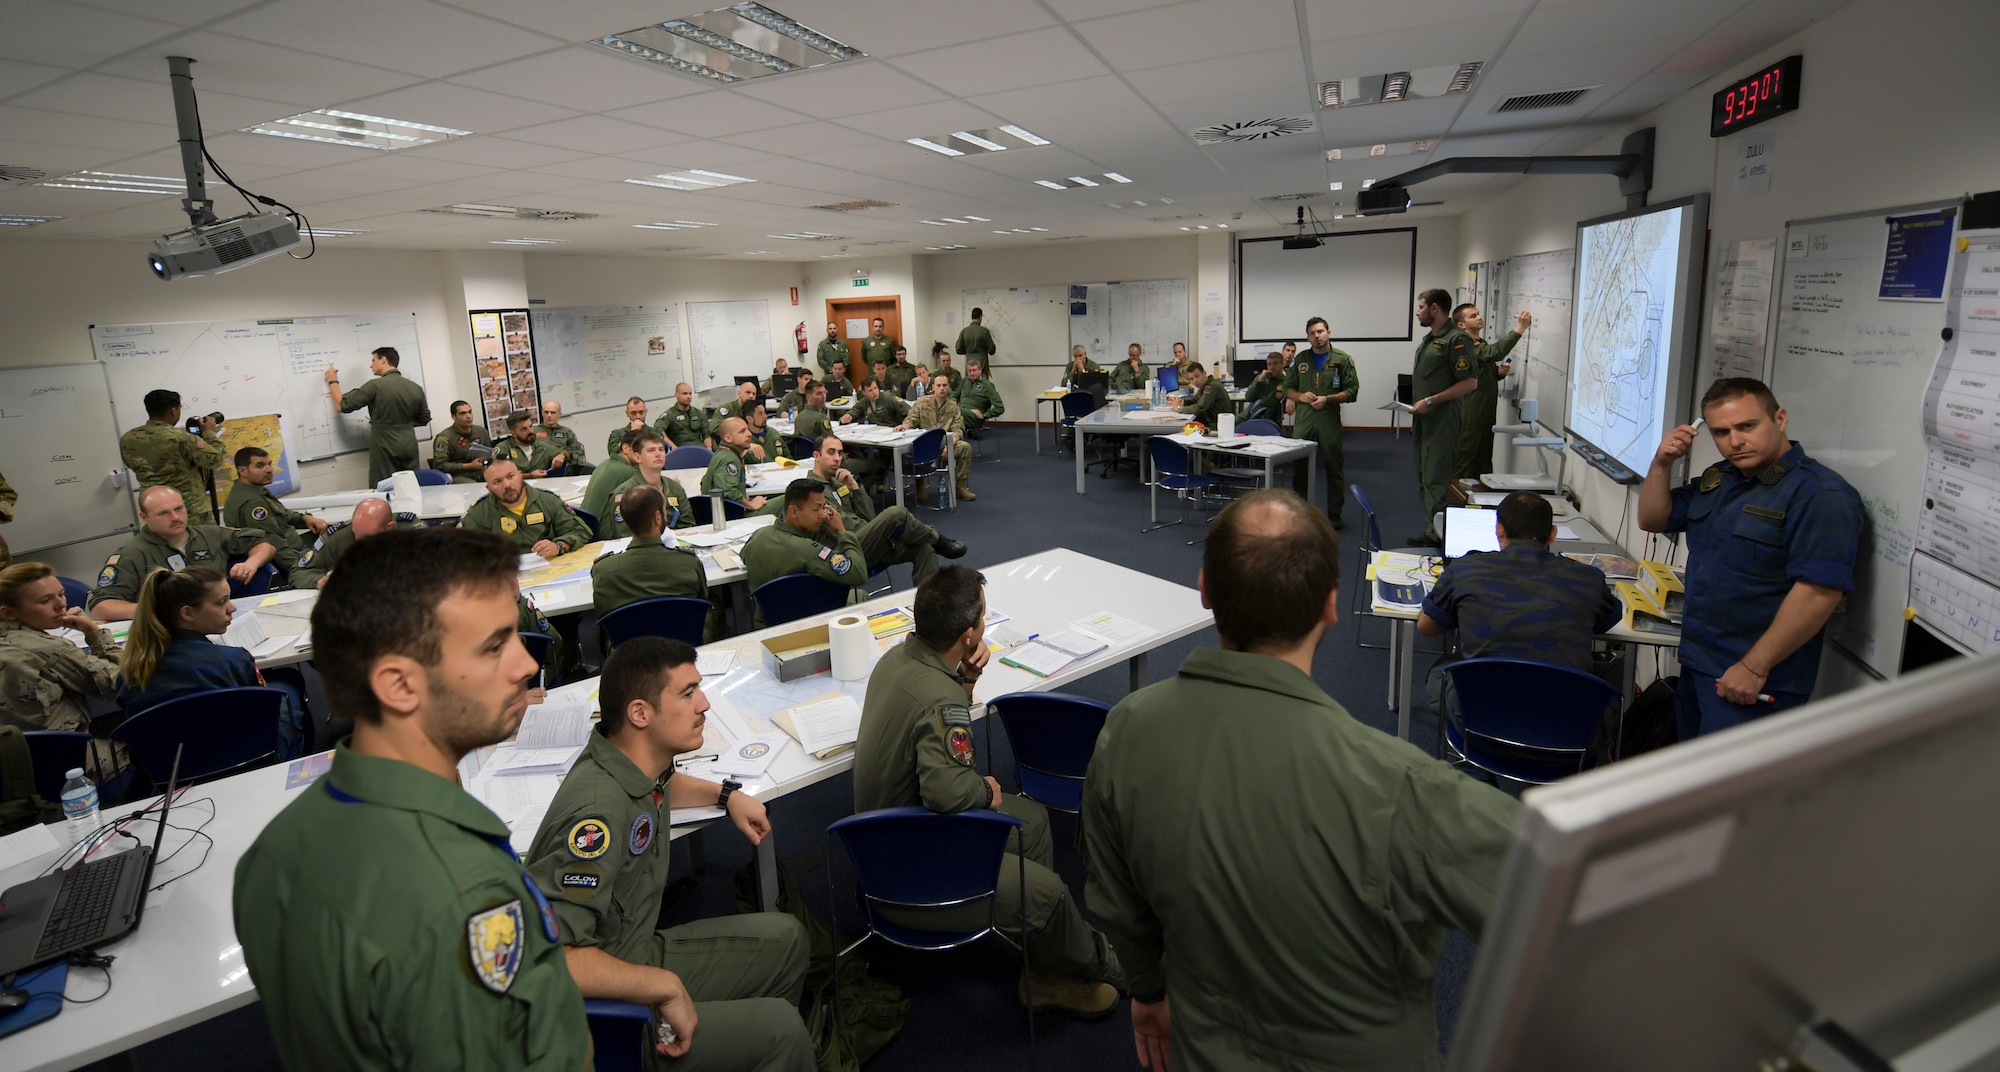 Group of U.S. and NATO pilots seen in pre-flight briefing room.